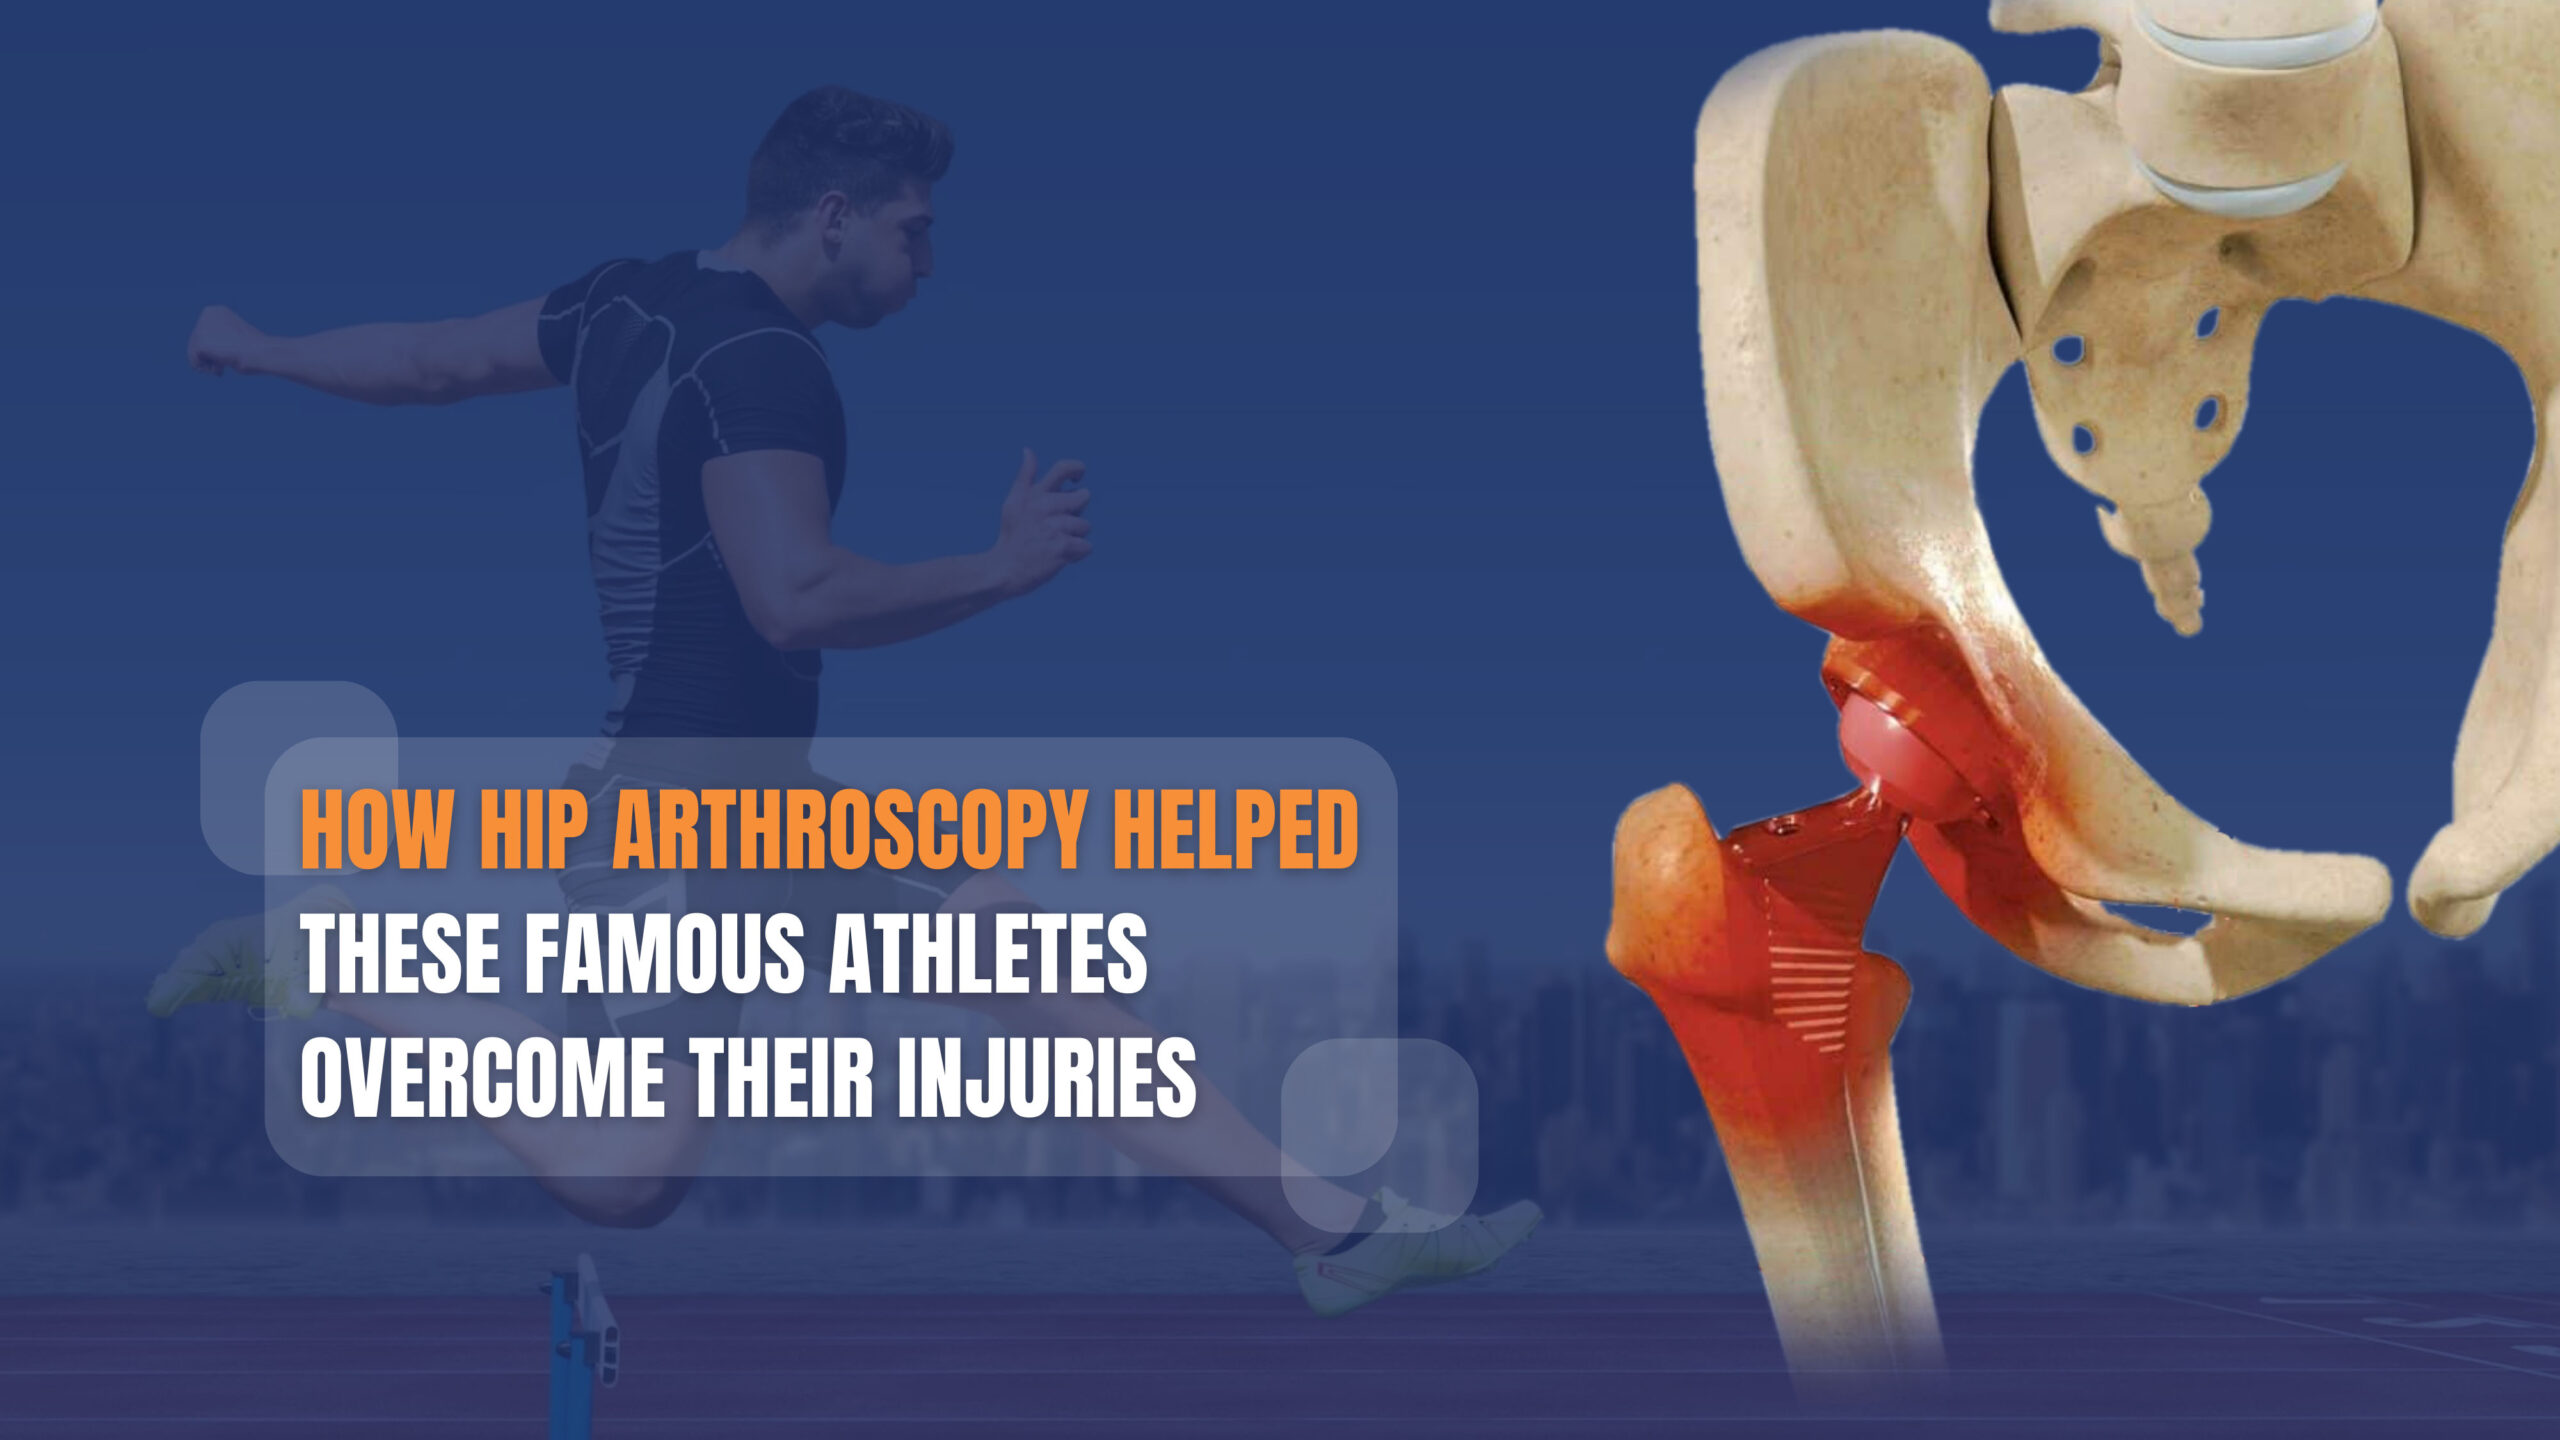 How Hip Arthroscopy Helped These Famous Athletes Overcome Their Injuries And Achieve Their Goals 3763